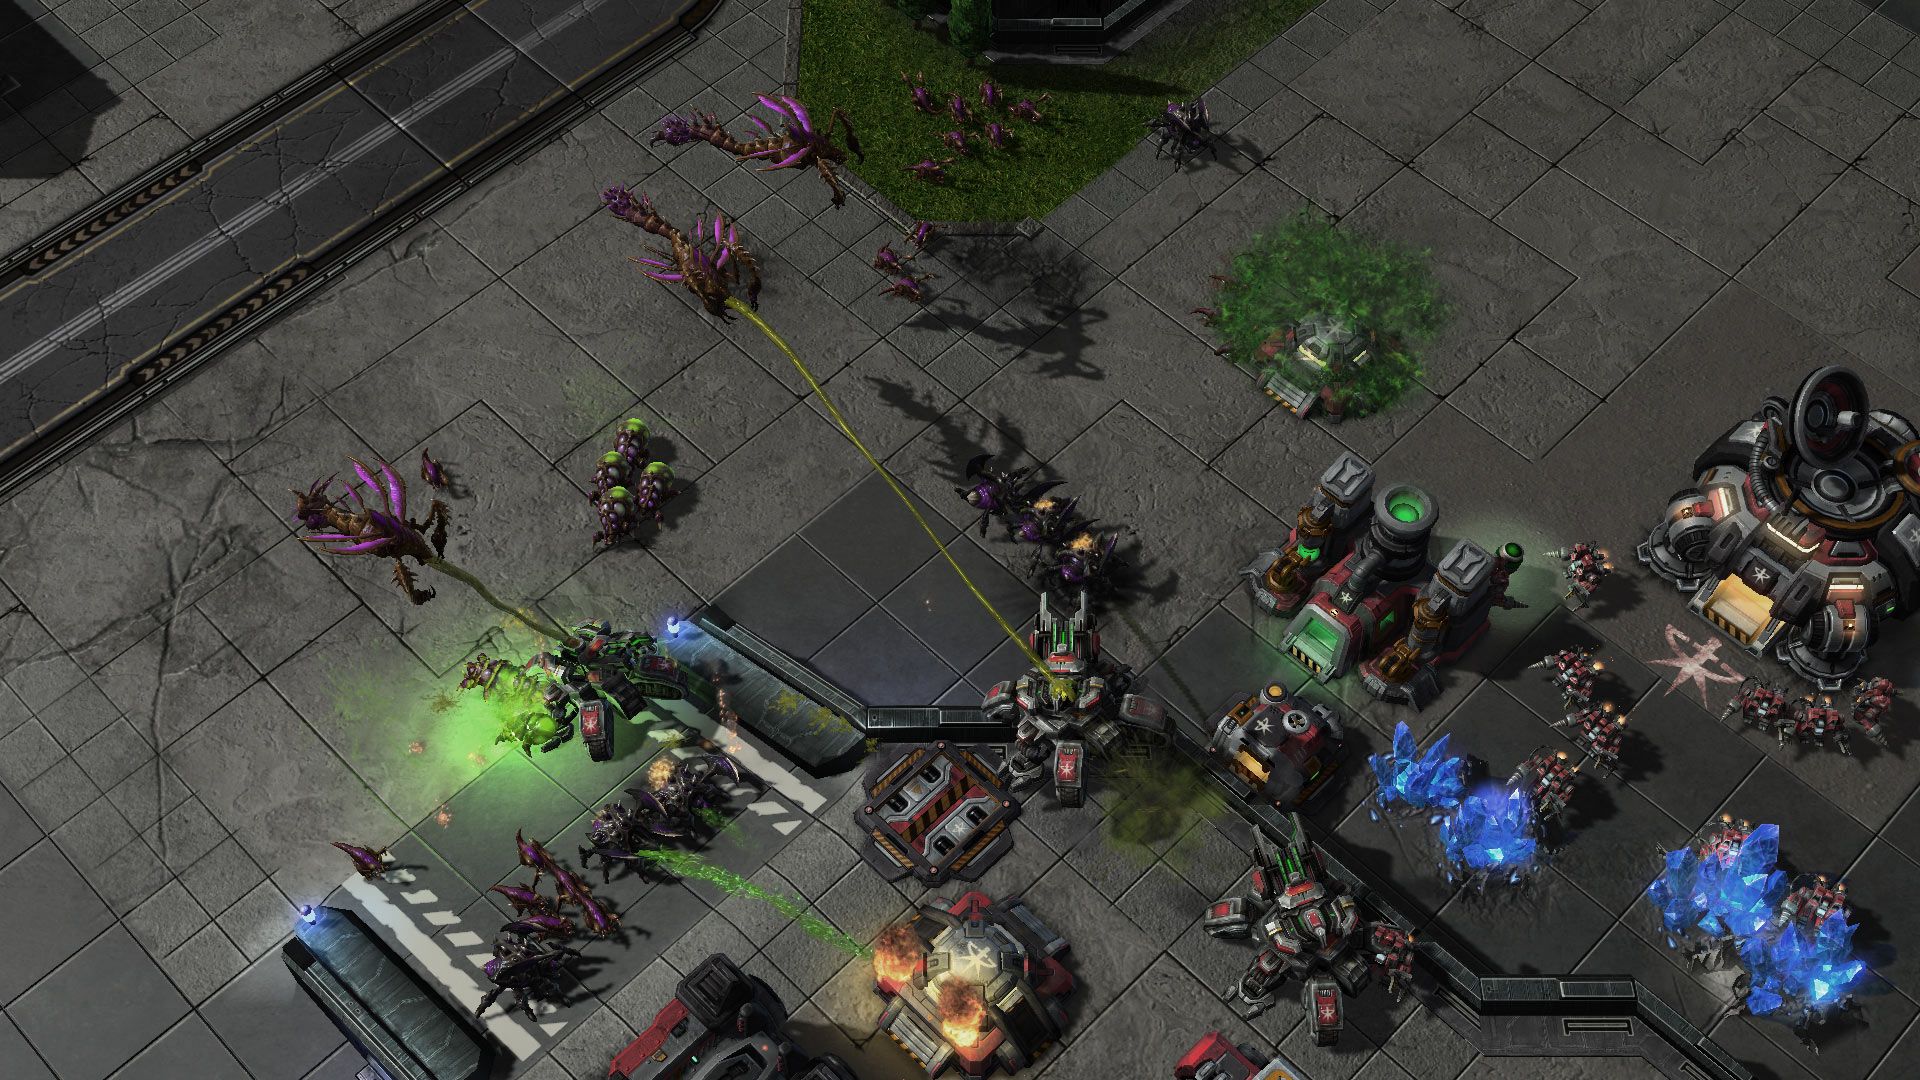 starcraft 2 heart of the swarm